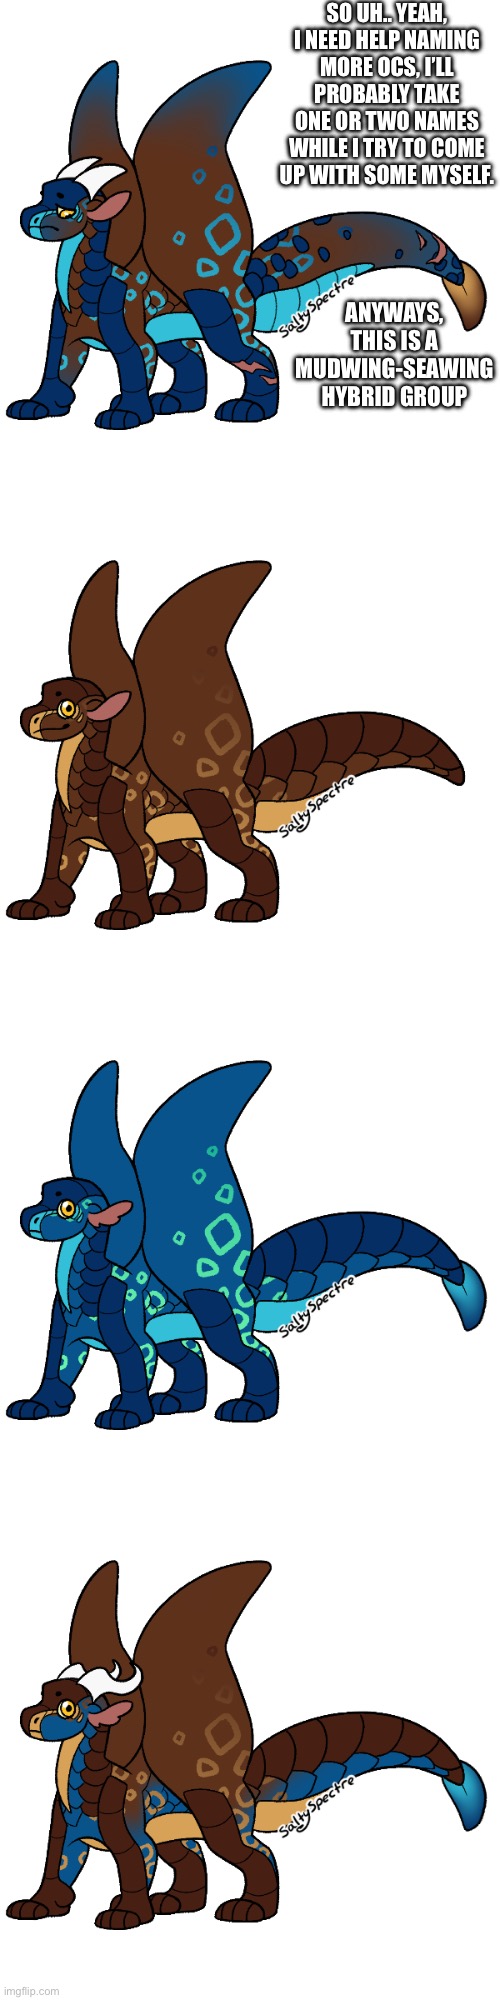 Total dragons: 4, 2 hybrid, 1 full mudwing, 1 full seawing, the missing dragon will become a piece of lore later | SO UH.. YEAH, I NEED HELP NAMING MORE OCS, I’LL PROBABLY TAKE ONE OR TWO NAMES WHILE I TRY TO COME UP WITH SOME MYSELF. ANYWAYS, THIS IS A MUDWING-SEAWING HYBRID GROUP | made w/ Imgflip meme maker